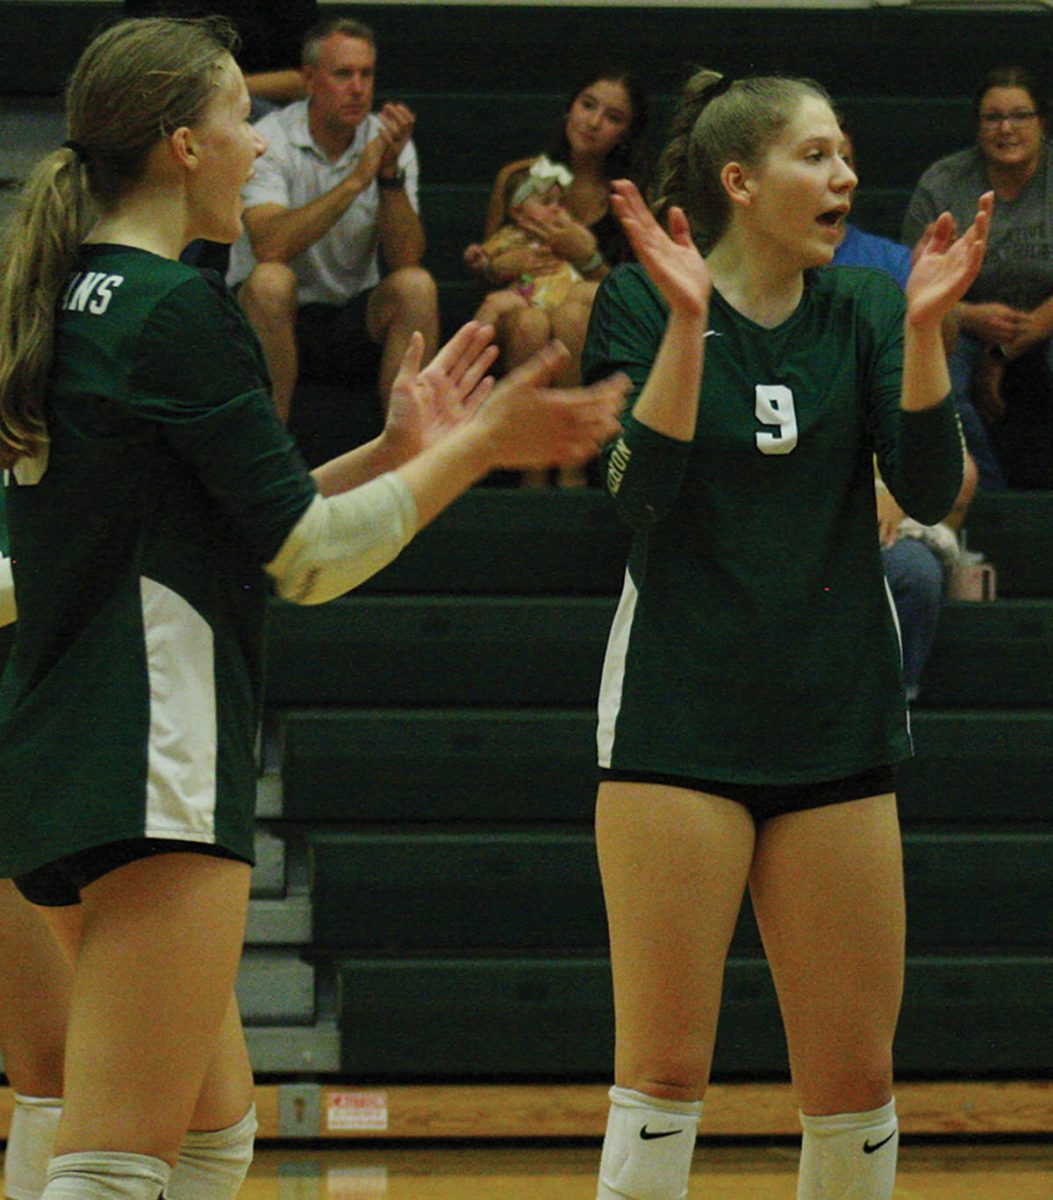 Freshman Courtney Owen (left) and senior Brianna Owen celebrate together after the team wins a point in a game against Highland Park on Sept. 6. The point contributed to the 26-24 win in the second set with the match ending in a Spartan victory. Photo by Cailyn Kelsen